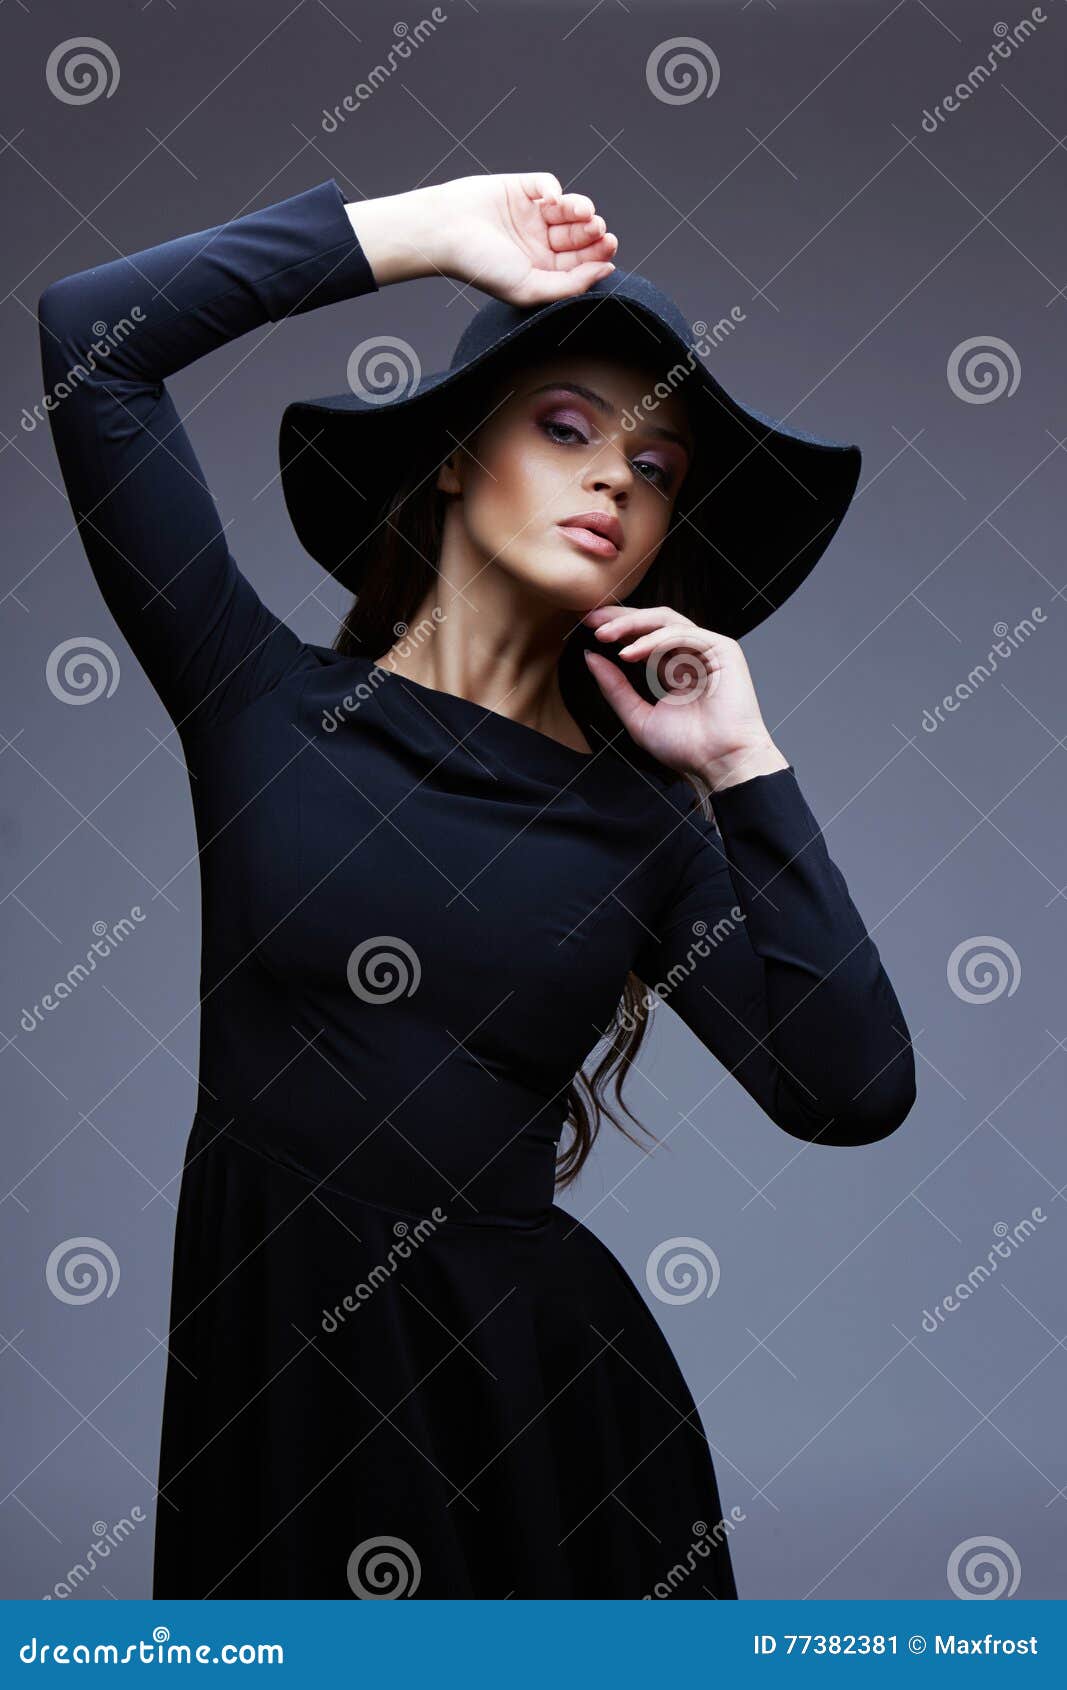 Fashion Portrait of Elegant Woman in Black Hat and Dress Stock Image ...